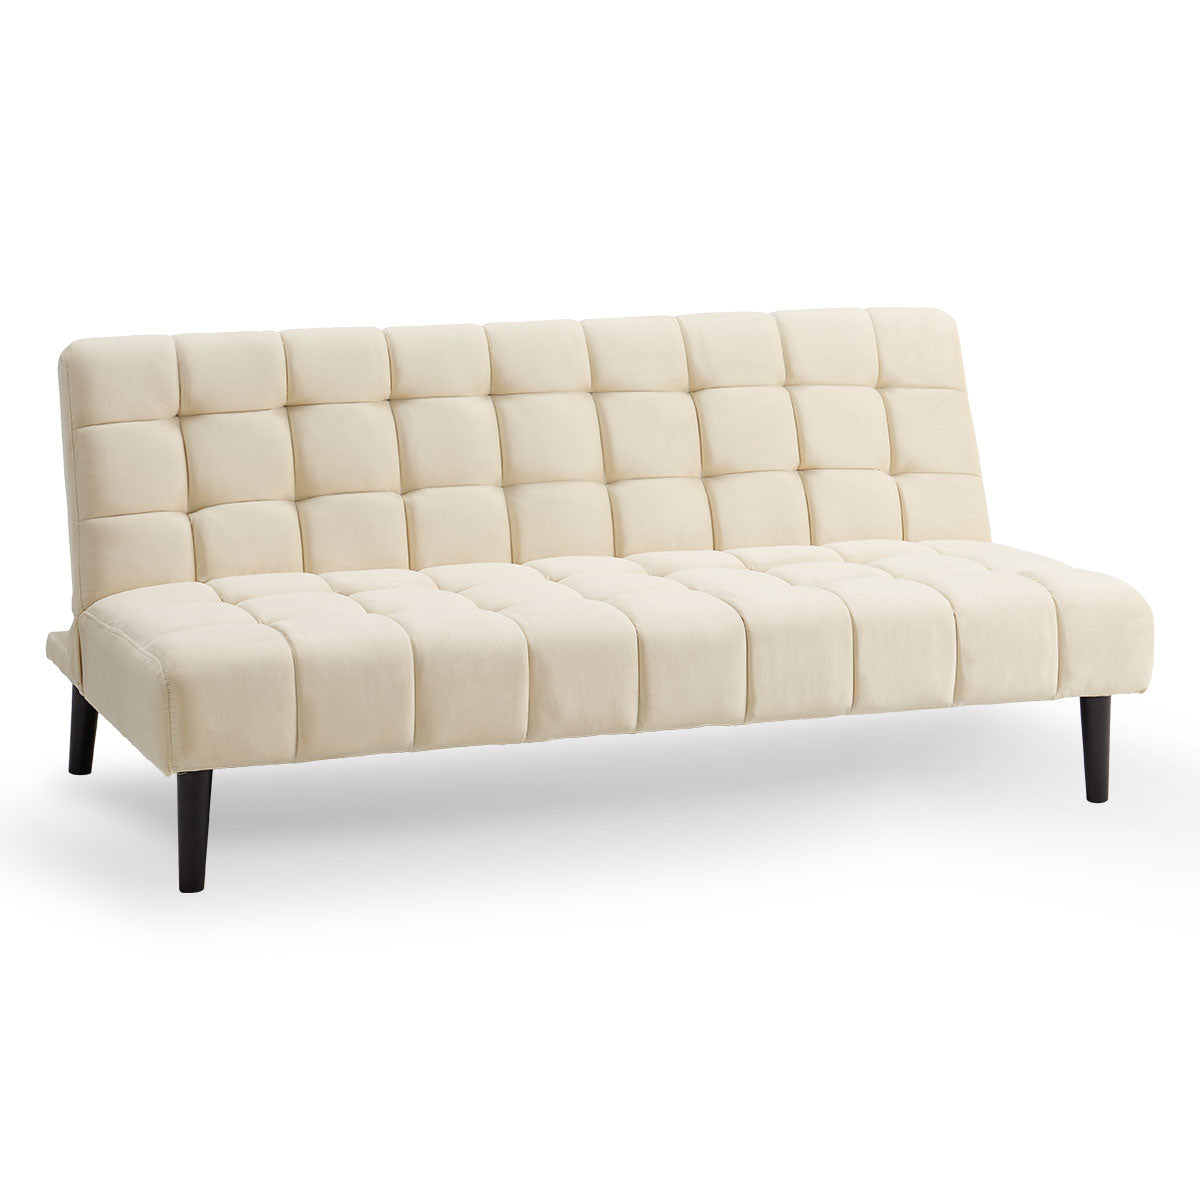 Marlena 3-Seater Faux Suede Fabric Sofa Bed Lounge - Beige